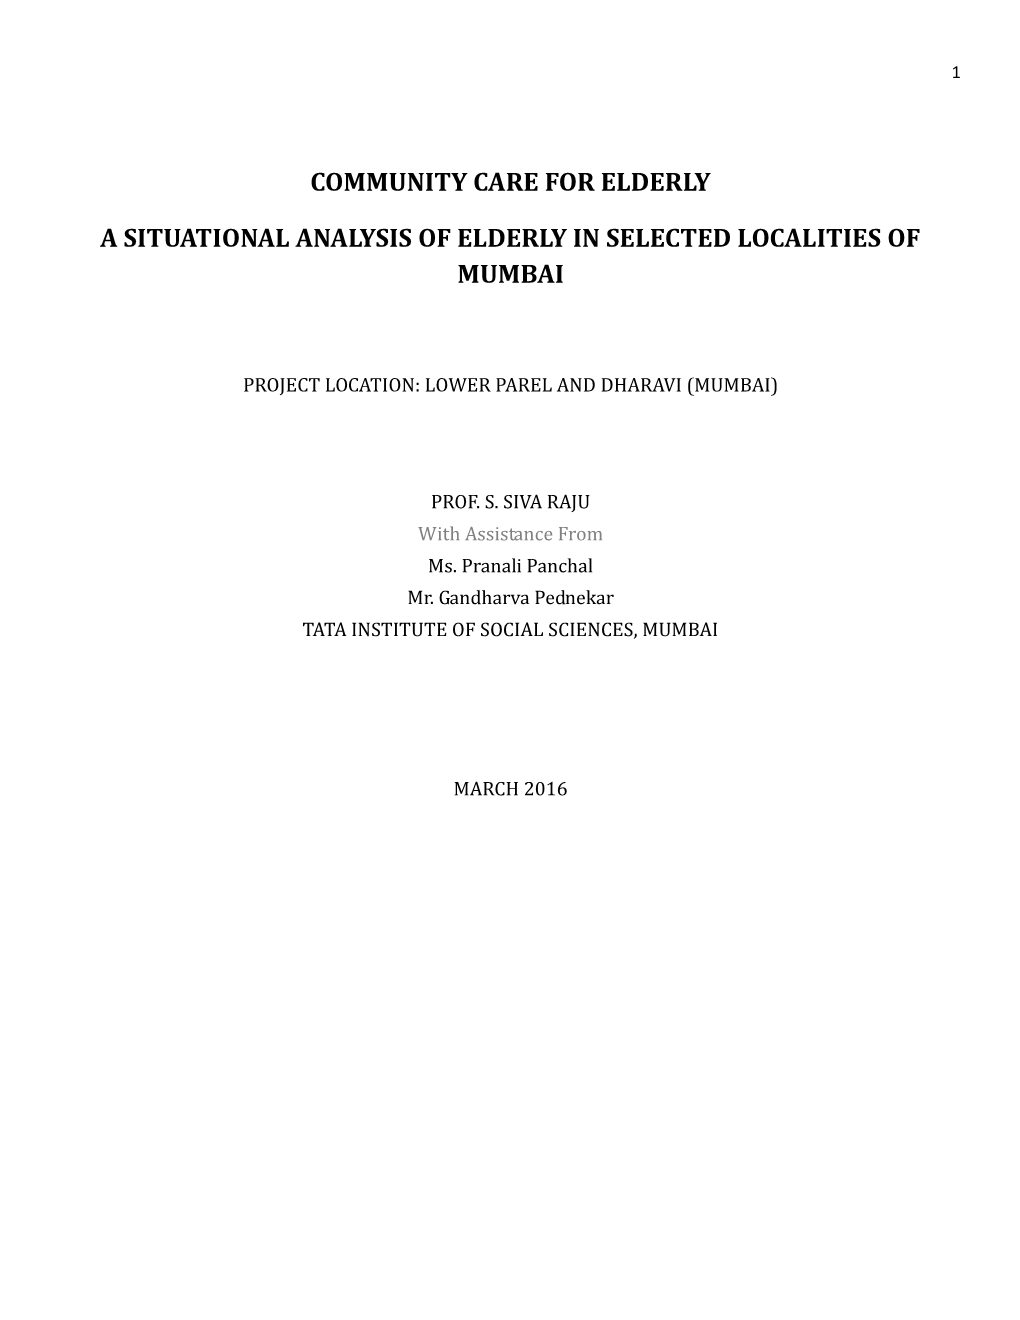 Community Care for Elderly a Situational Analysis Of